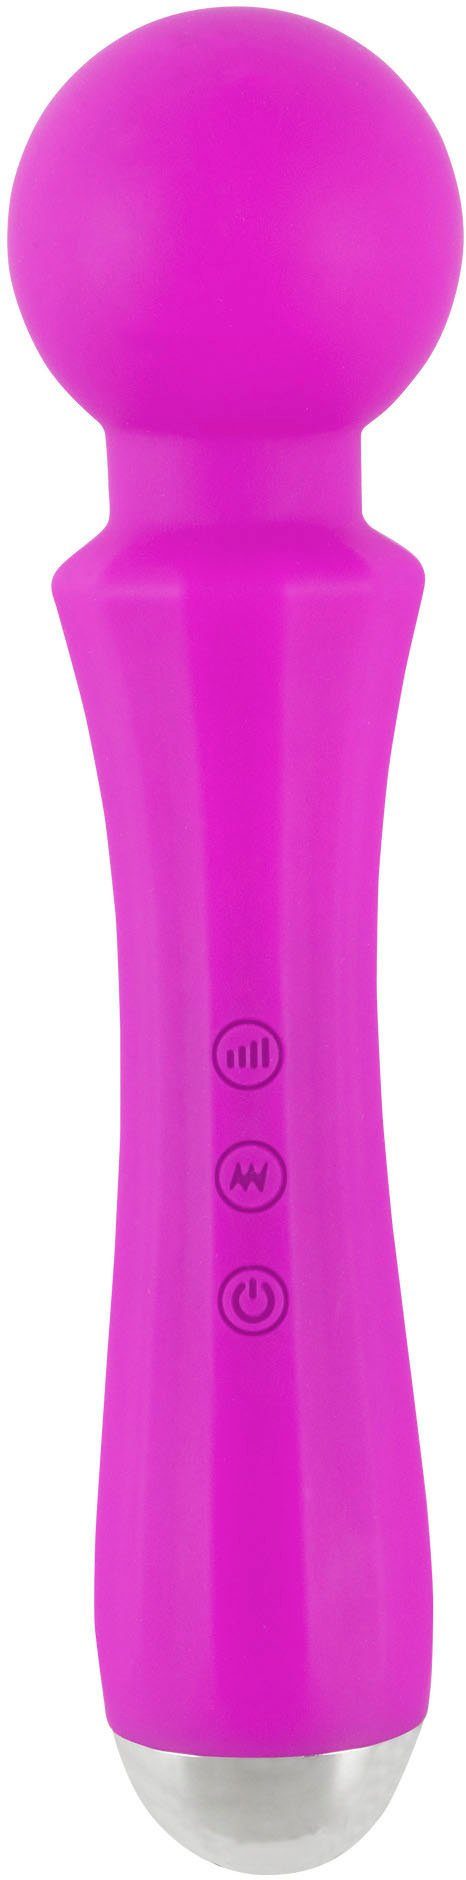 Sweet Smile Smile Wand Massager